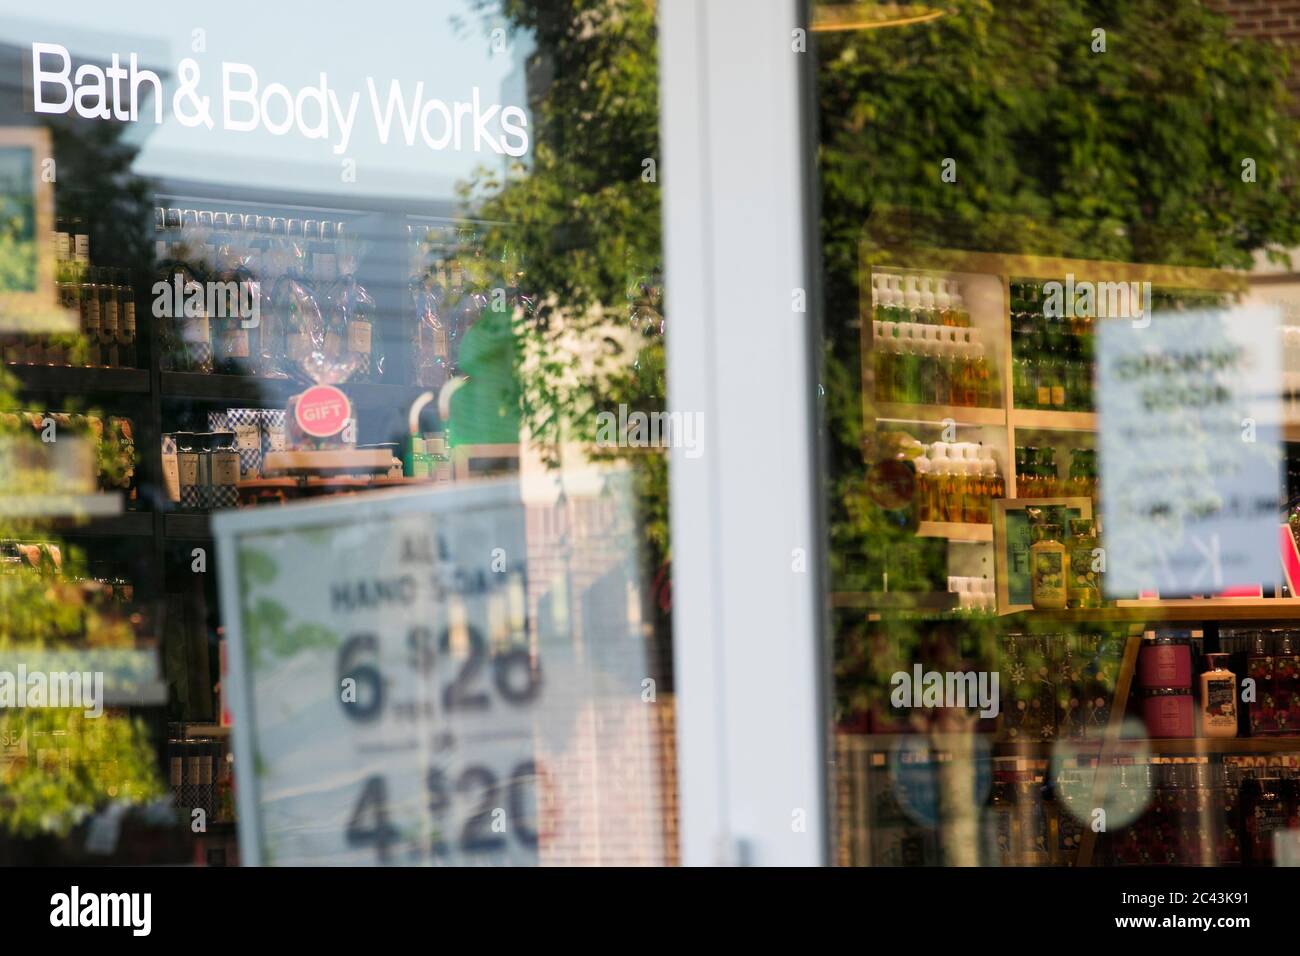 A logo sign outside of a Bath & Body Works retail store location in Bowie, Maryland on June 8, 2020. Stock Photo